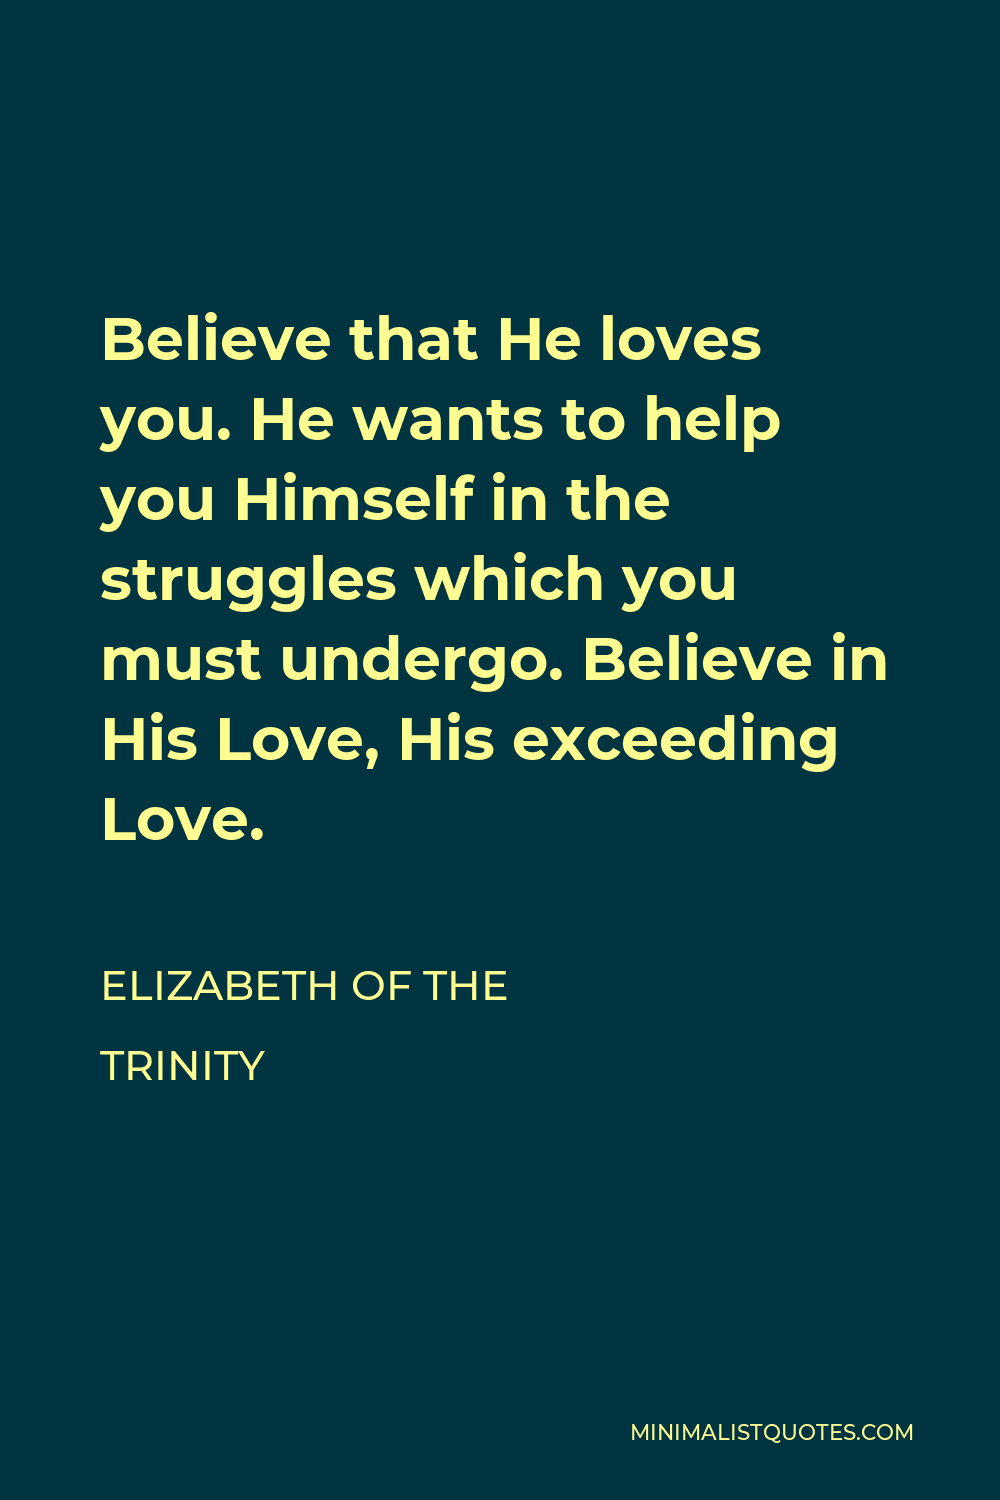 Elizabeth of the Trinity Quote - Believe that He loves you. He wants to help you Himself in the struggles which you must undergo. Believe in His Love, His exceeding Love.